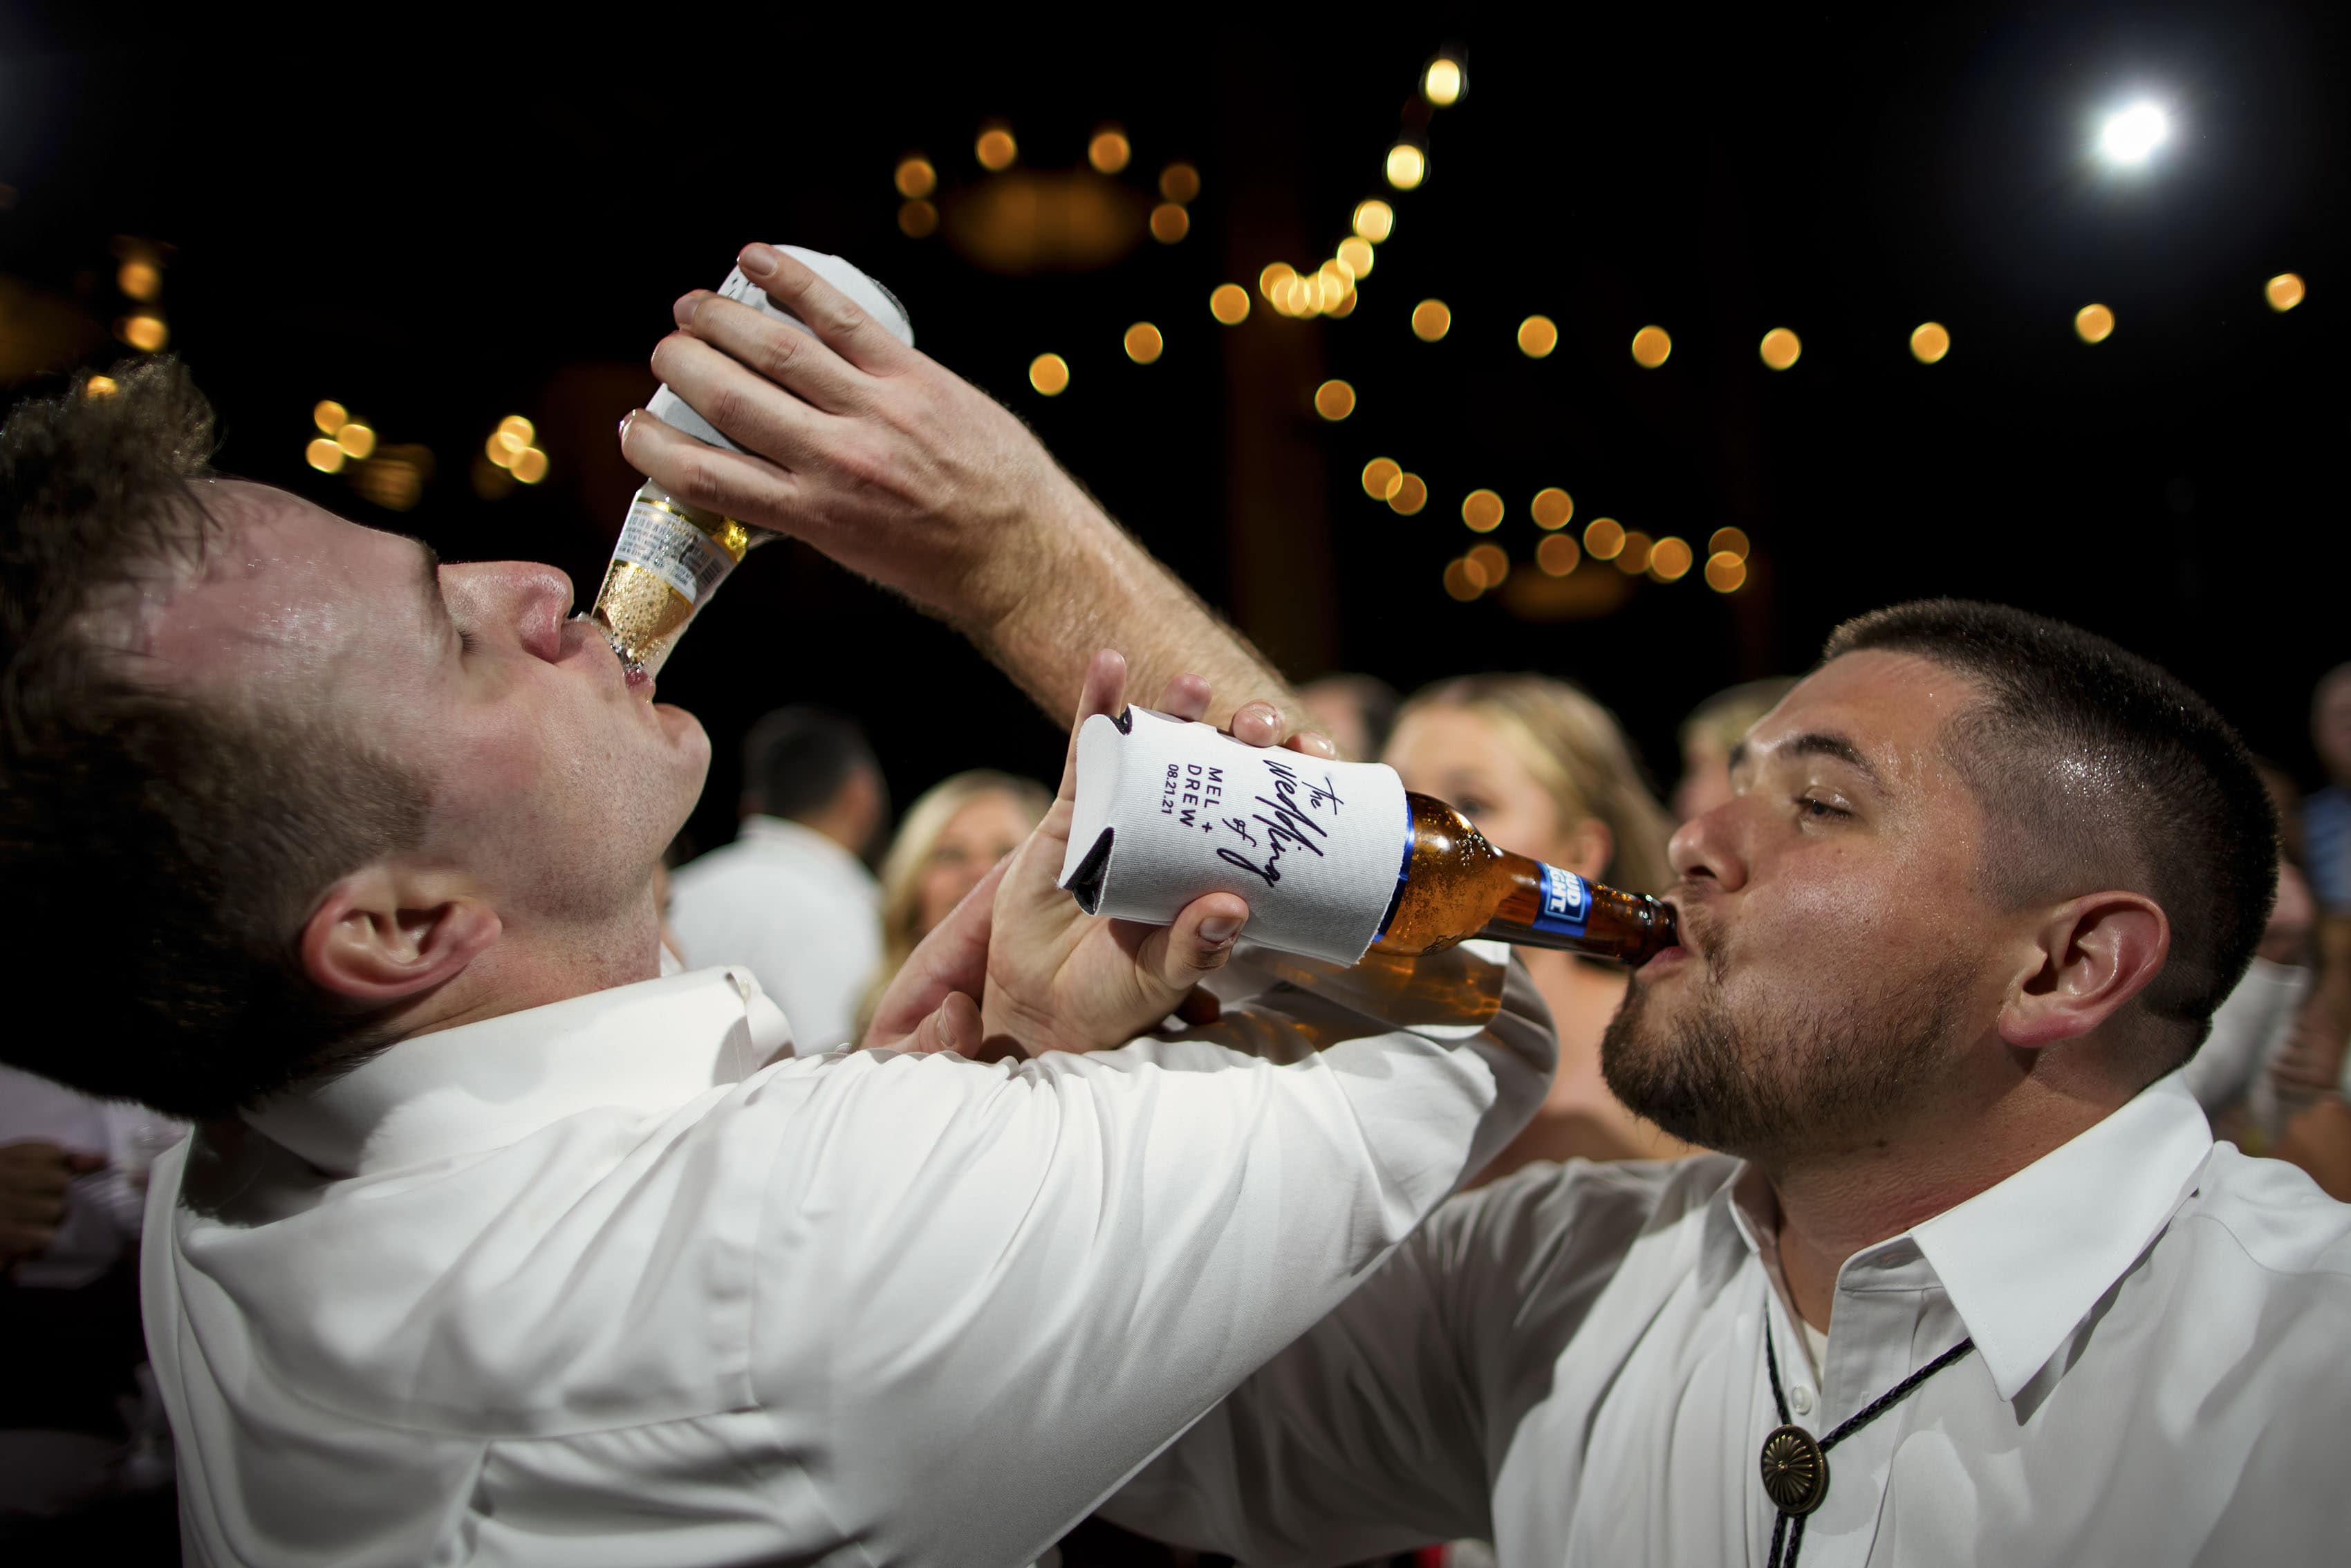 Guests drink beers together during a wedding reception in the Grand Hall at Copper Station